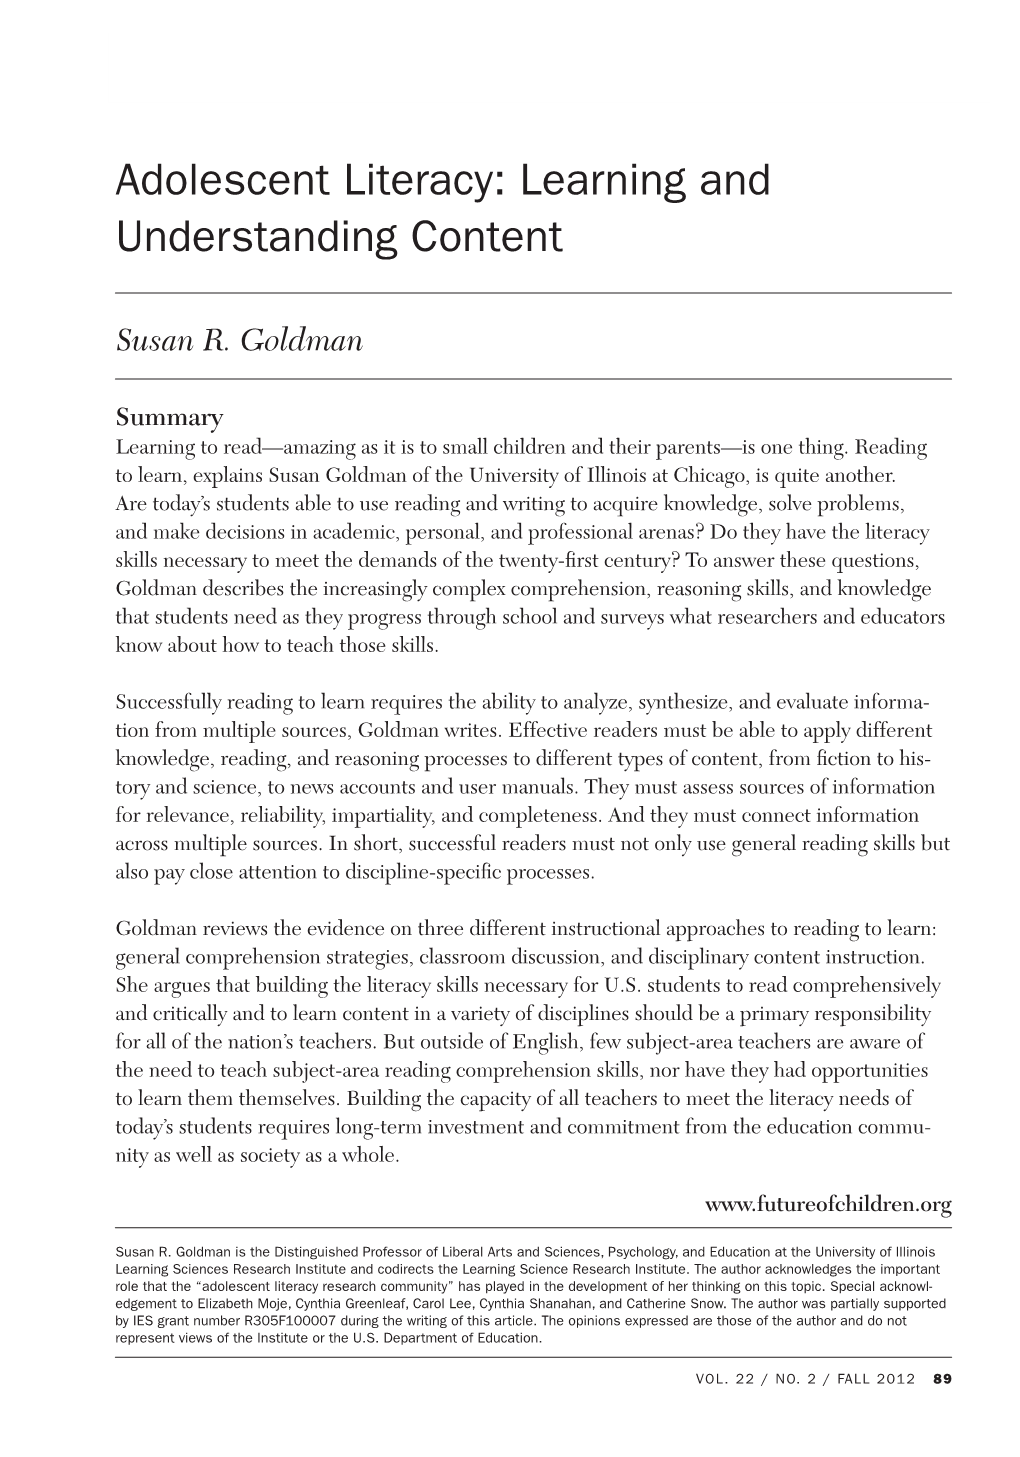 Adolescent Literacy: Learning and Understanding Content